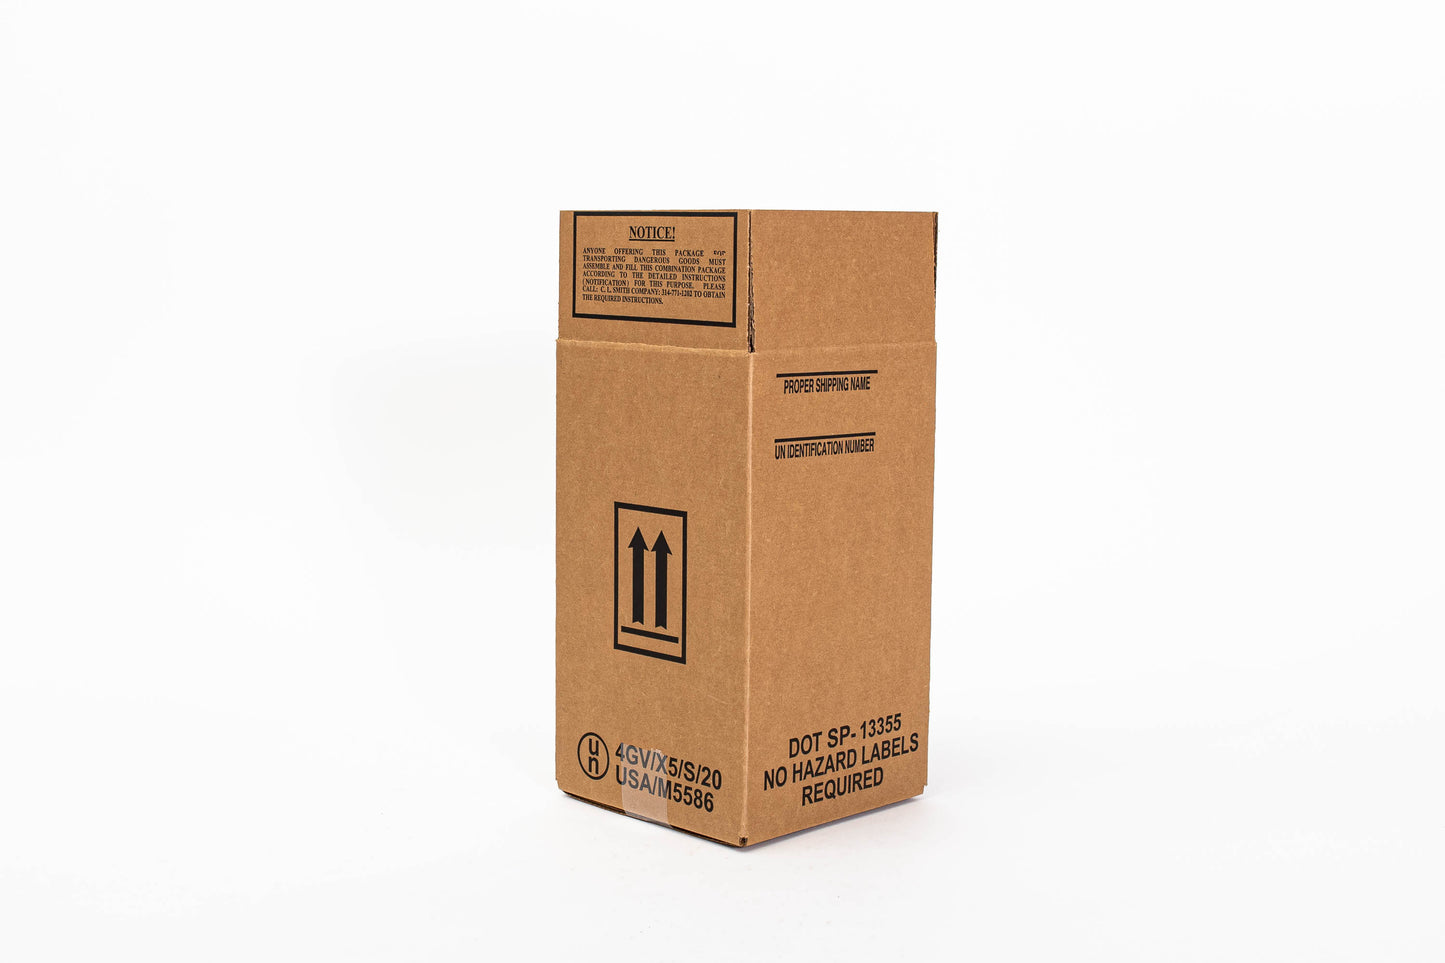 UN4GV 1-in 1 Liter/32 oz (or less) Special Permit Packaging Kit